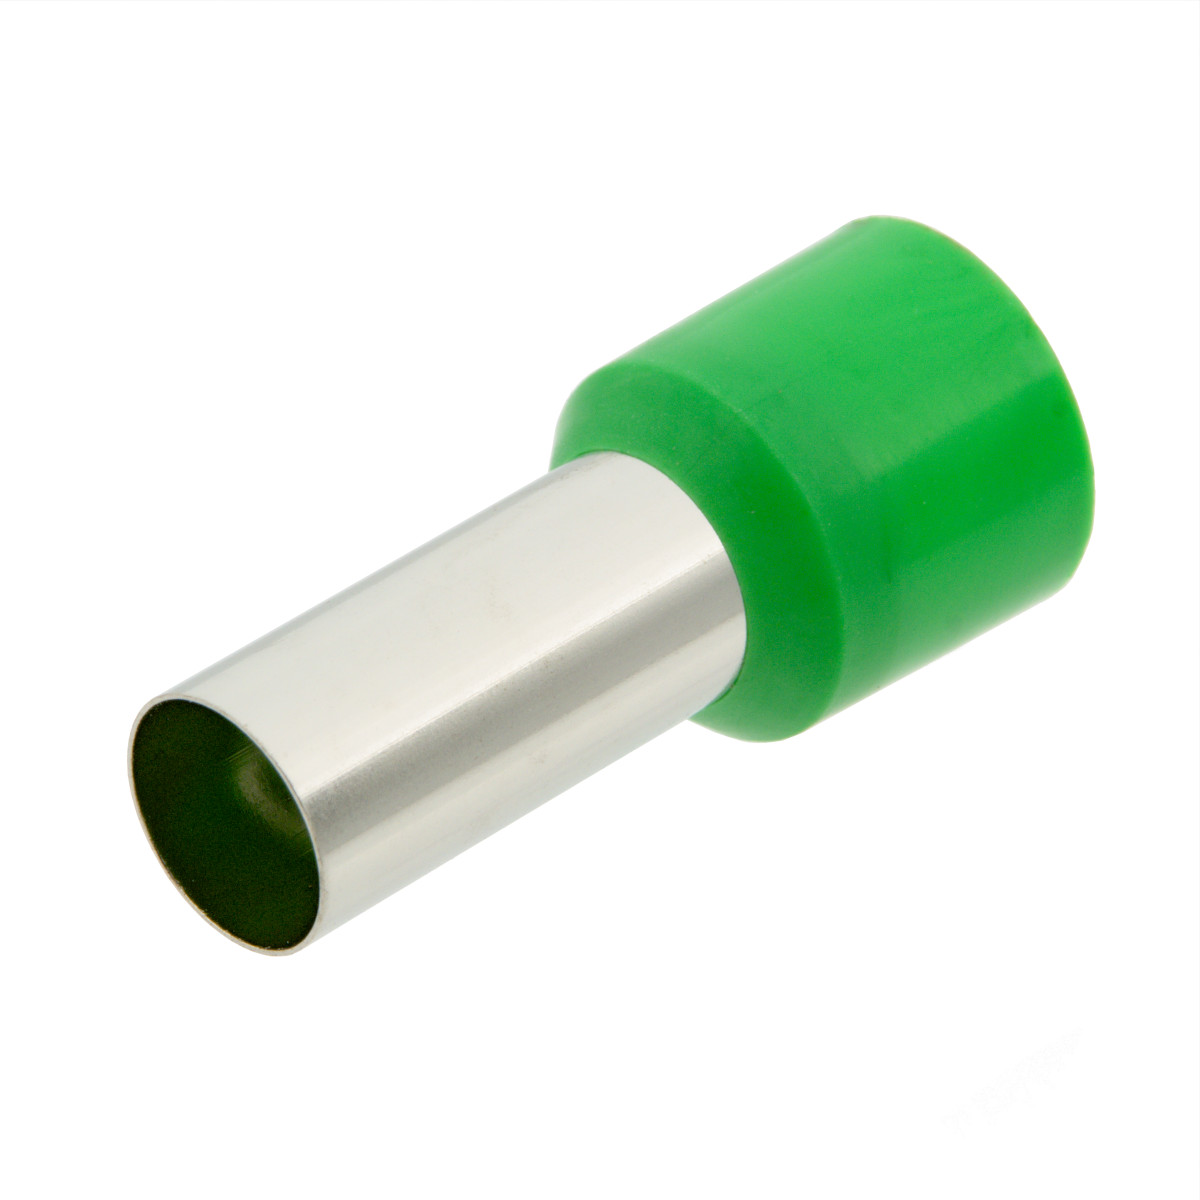 Insulated ferrule for 25.00mm² [AWG 4] cable